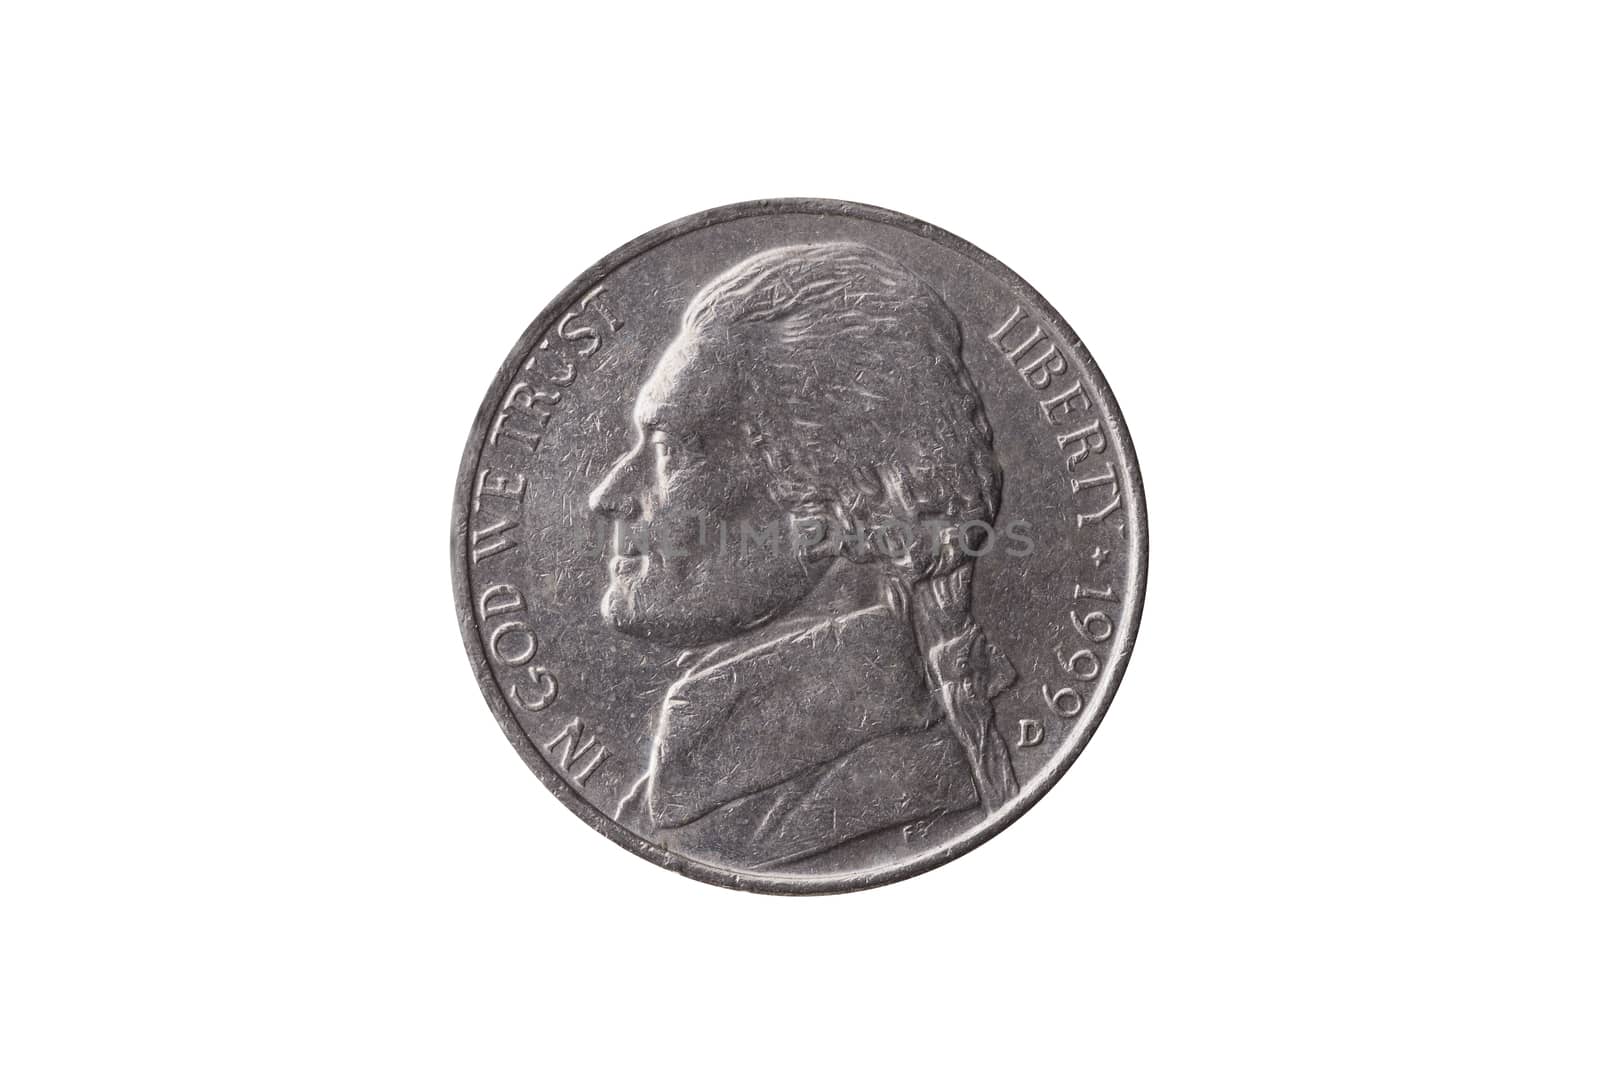 USA half dime nickel coin (25 cents) dated 1999 with a portrait  by ant